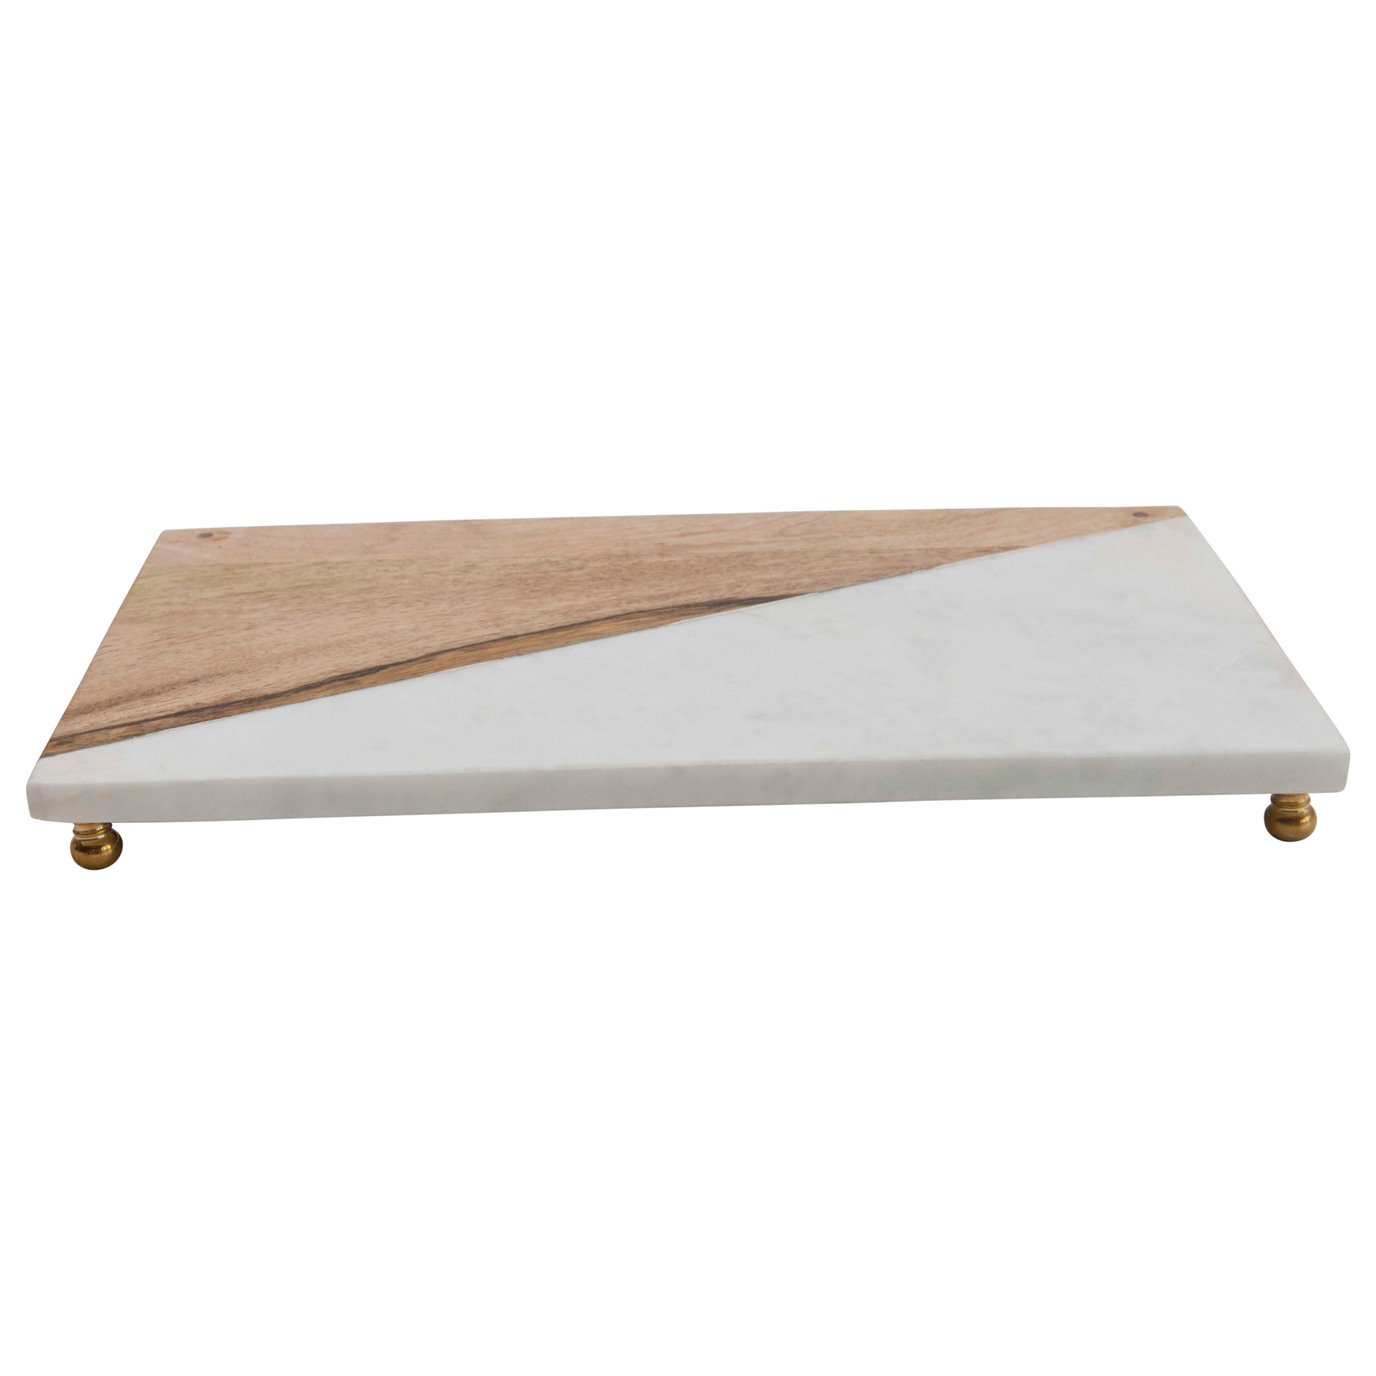 Mango Wood & Marble Cutting Board/Serving Tray with Brass Feet